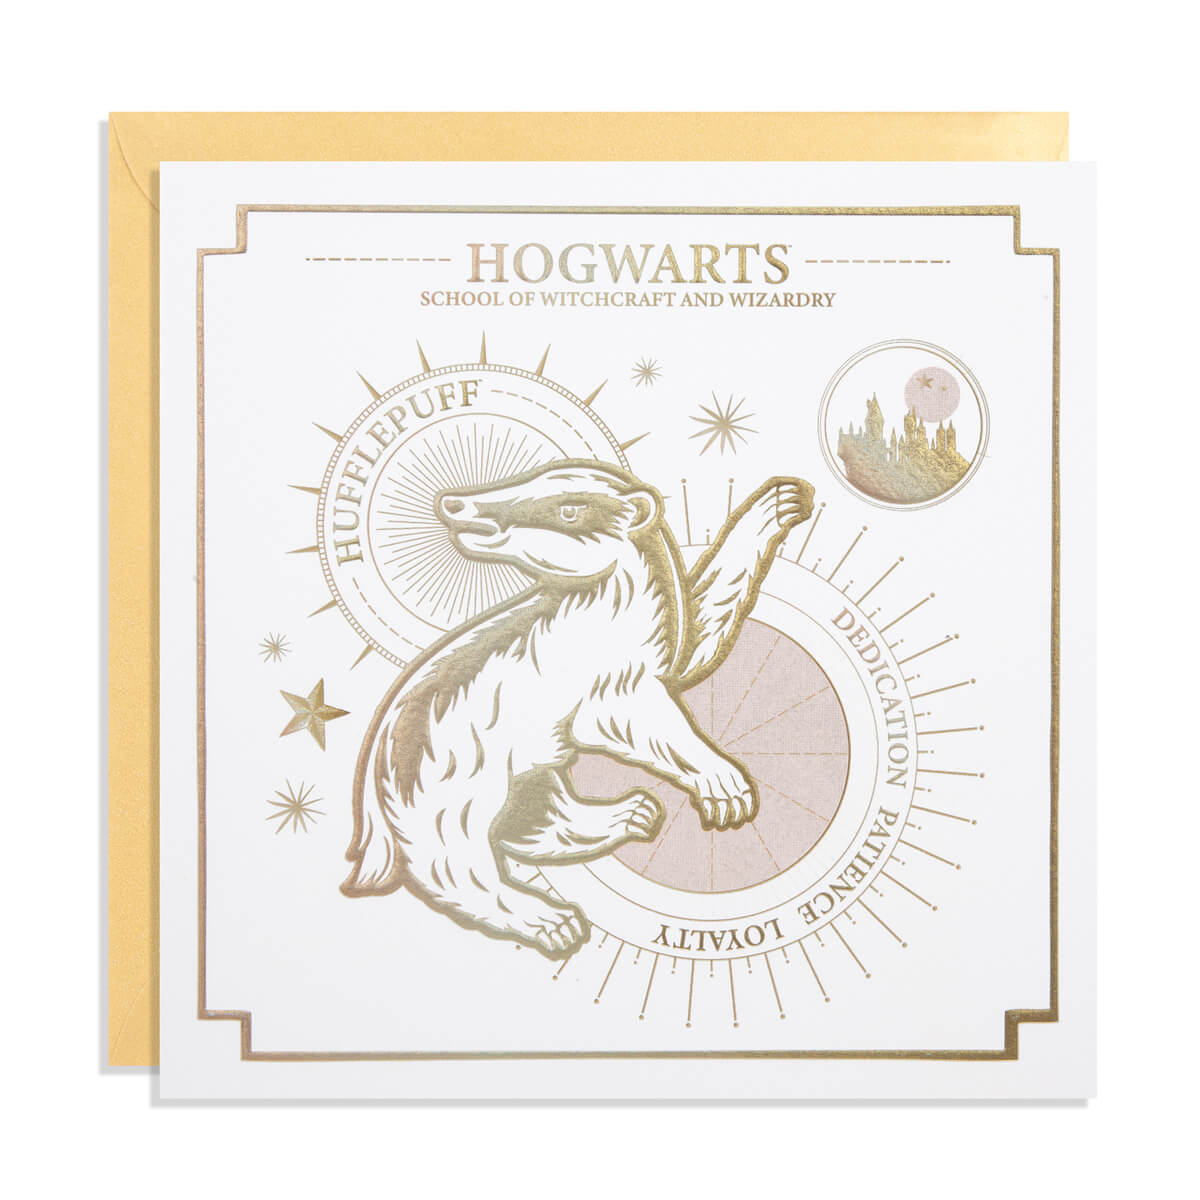 Harry Potter Hufflepuff Greetings Card - White Card with Gold Embossing -  photographed on a white background with gold envelope